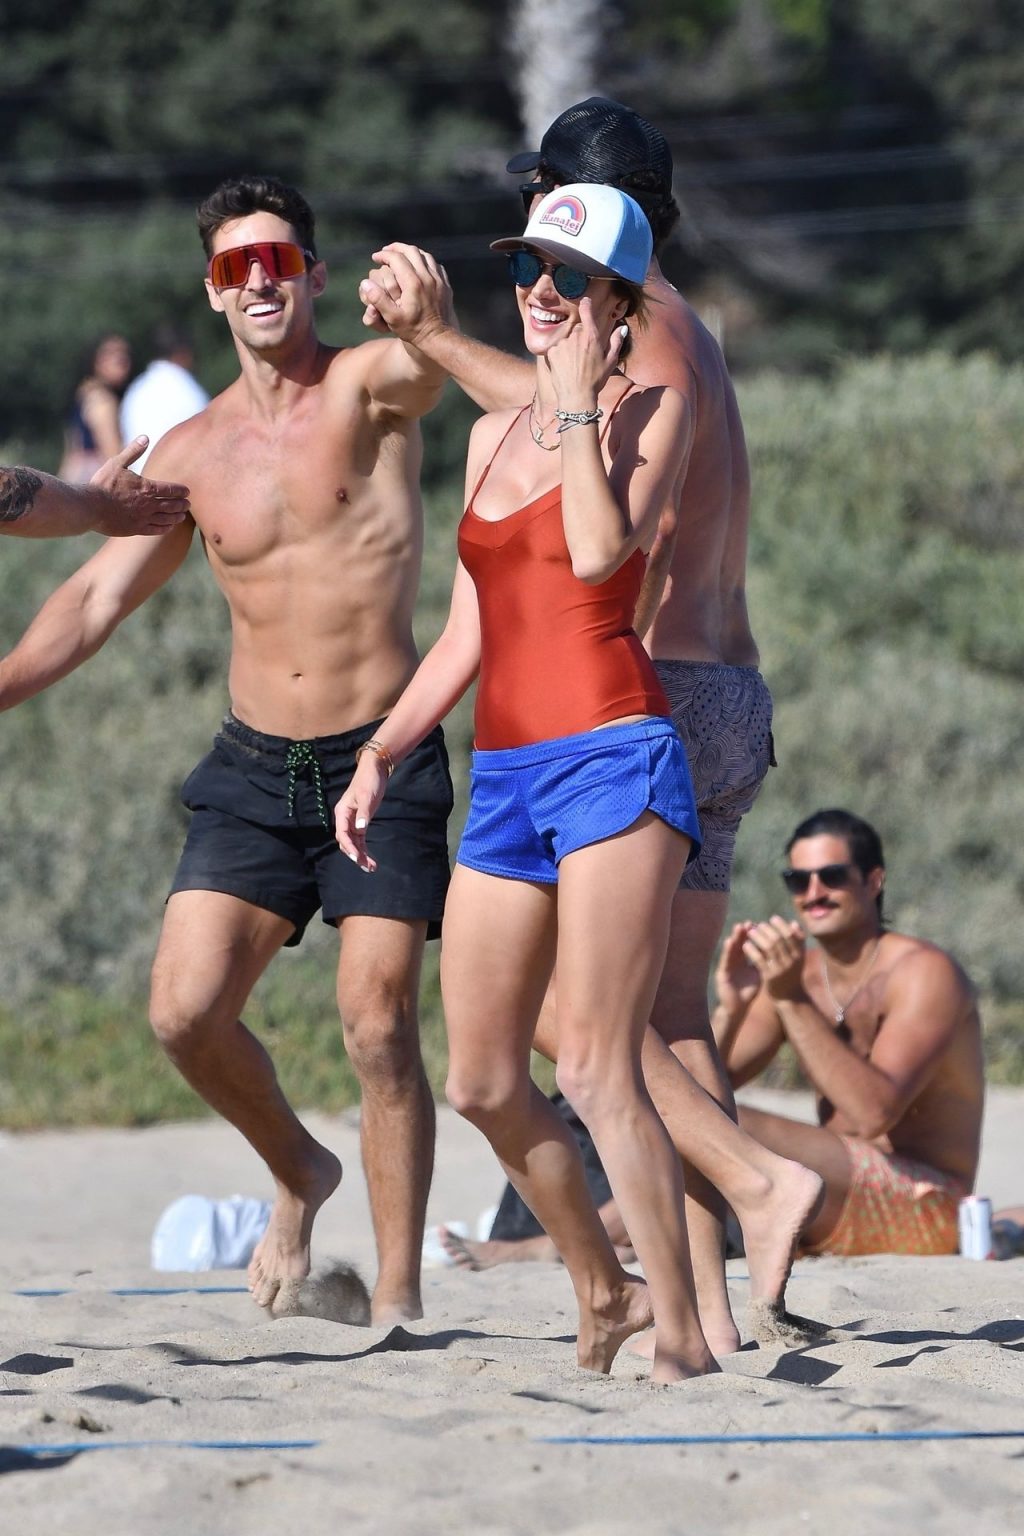 Alessandra Ambrosio Plays Volleyball at the Beach with Friends (70 Photos)